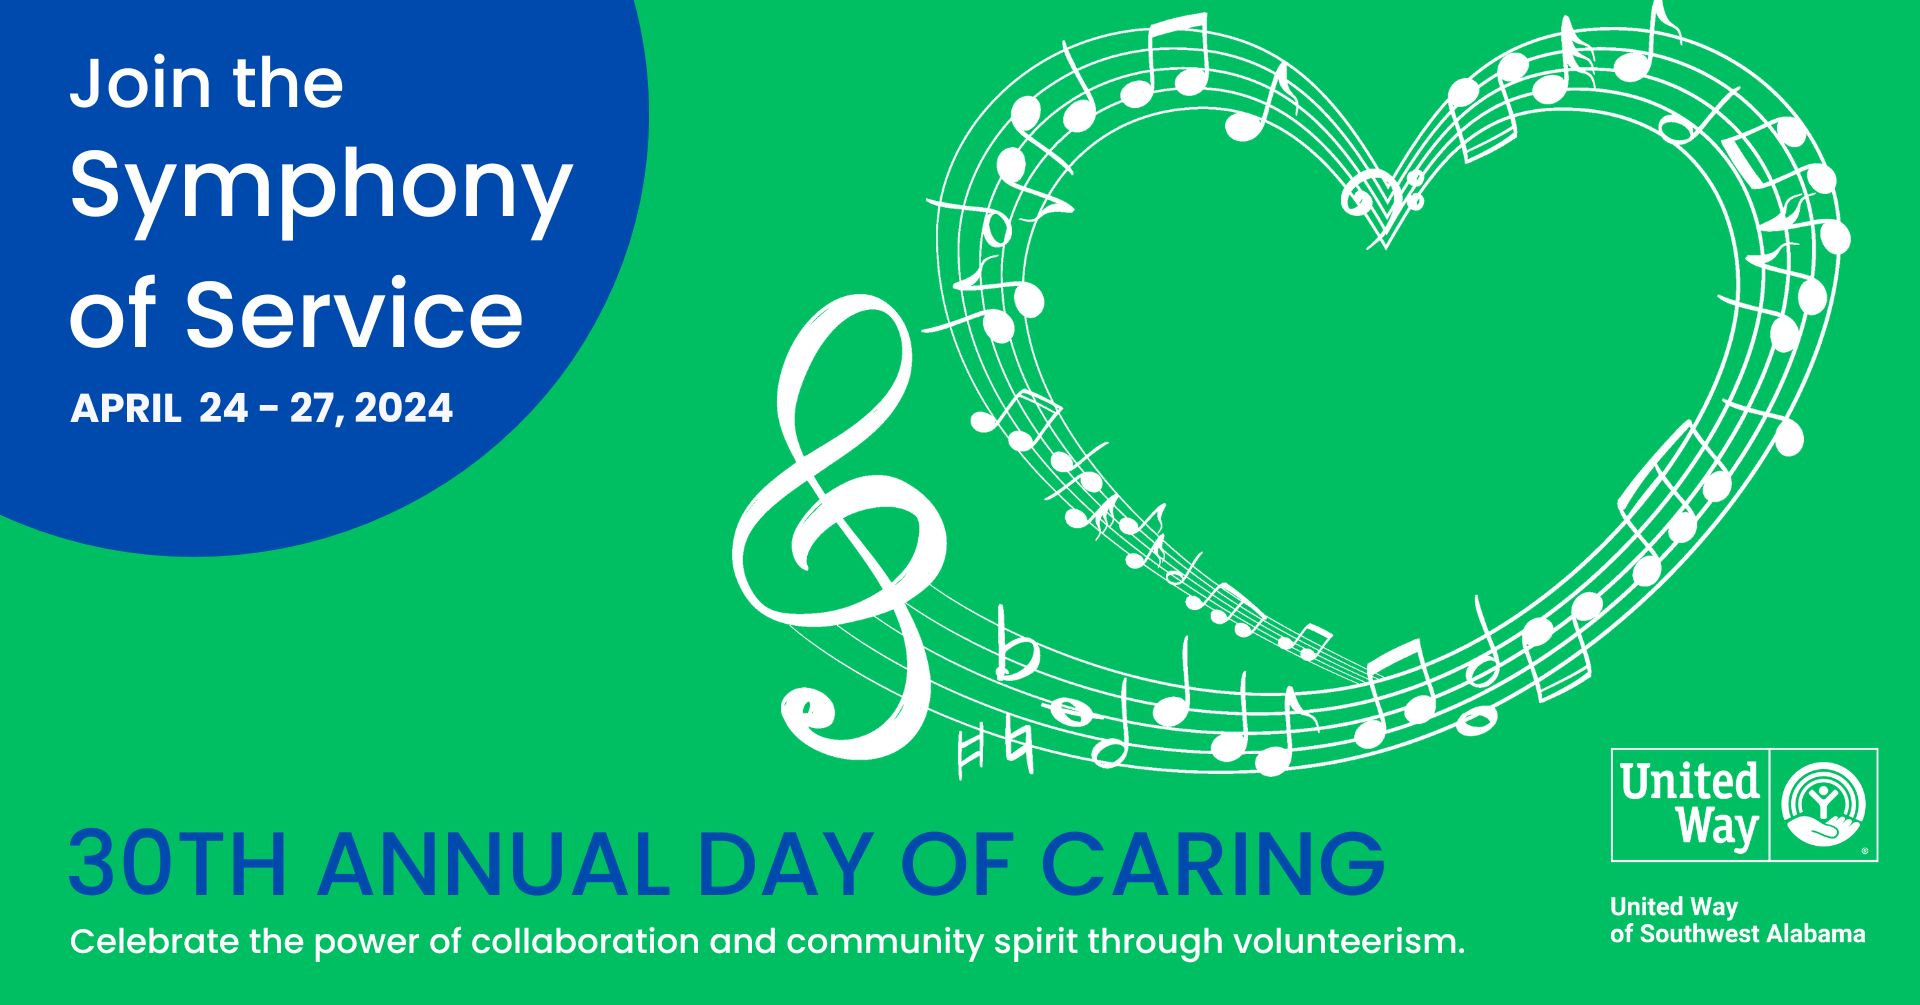 Join the Symphony of Service. 30th Annual Day of Caring. Celebrate the power of collaboration and community spirit through volunteerism.